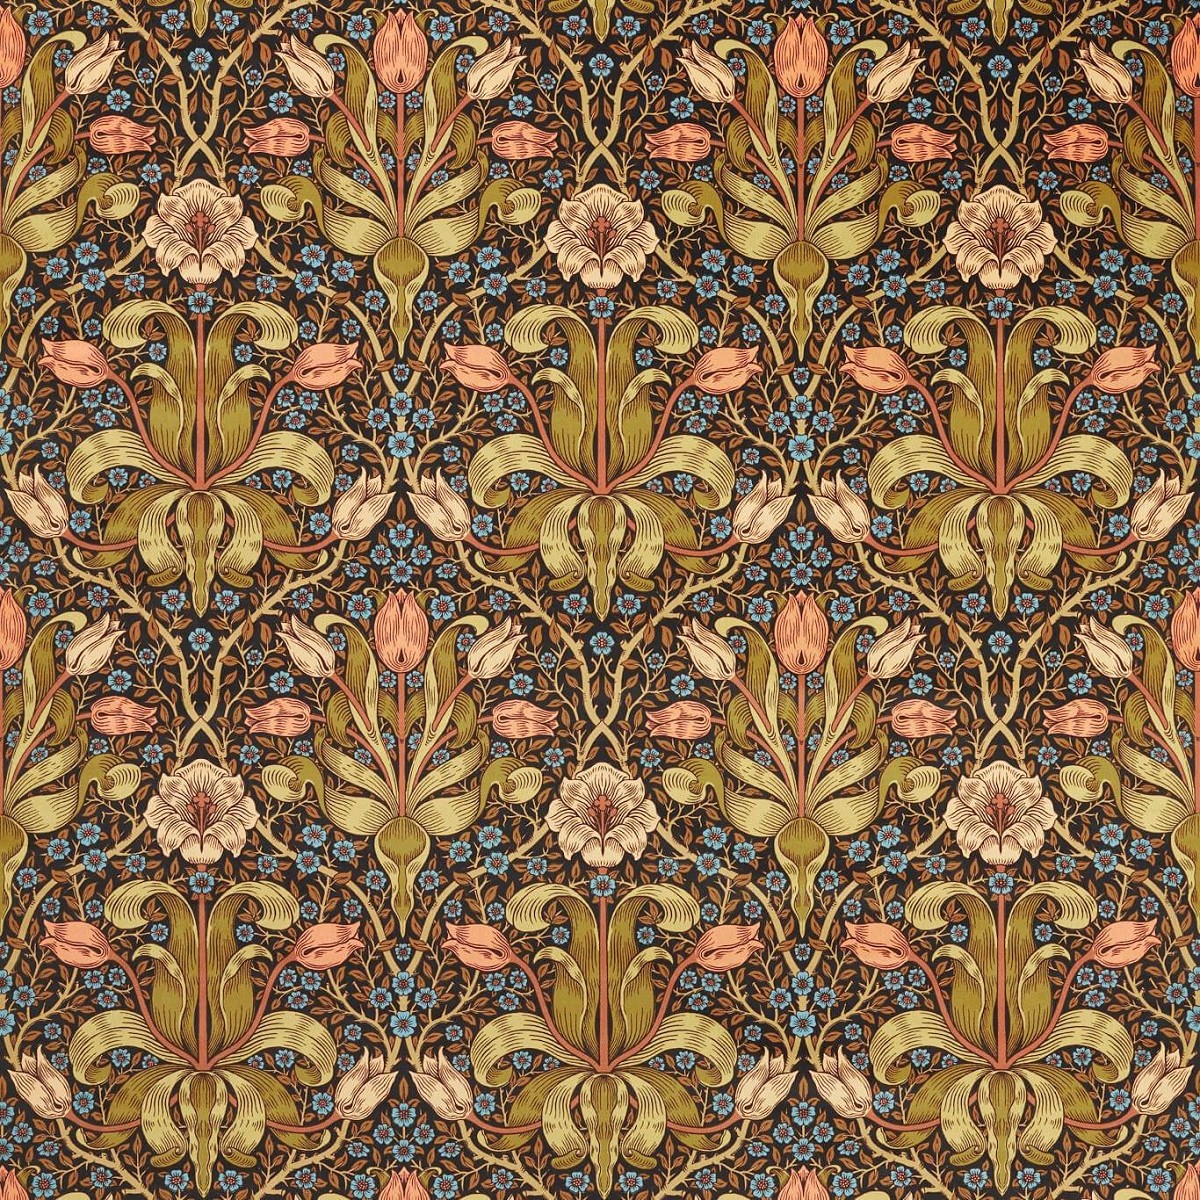 Spring Thicket Old Fashioned Fabric by William Morris & Co.